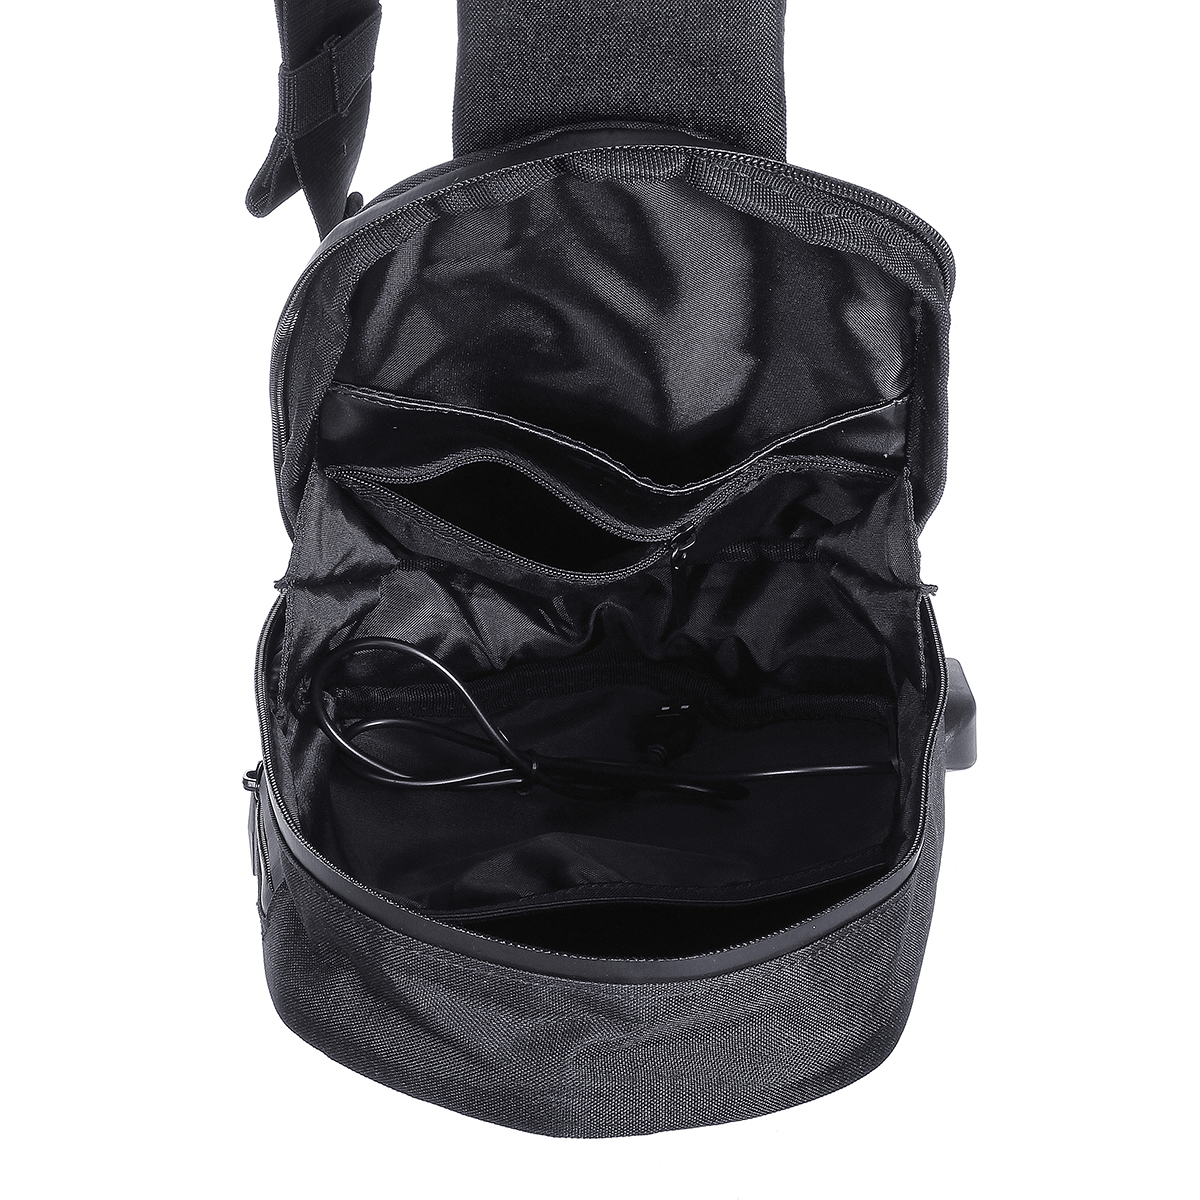 BEABORN Chest Packs Polyhedron PU Backpack USB Bag Waterproof Mens Women Travel Camping Leisure Sports Chest Pack Bags from Xiaomi Youpin